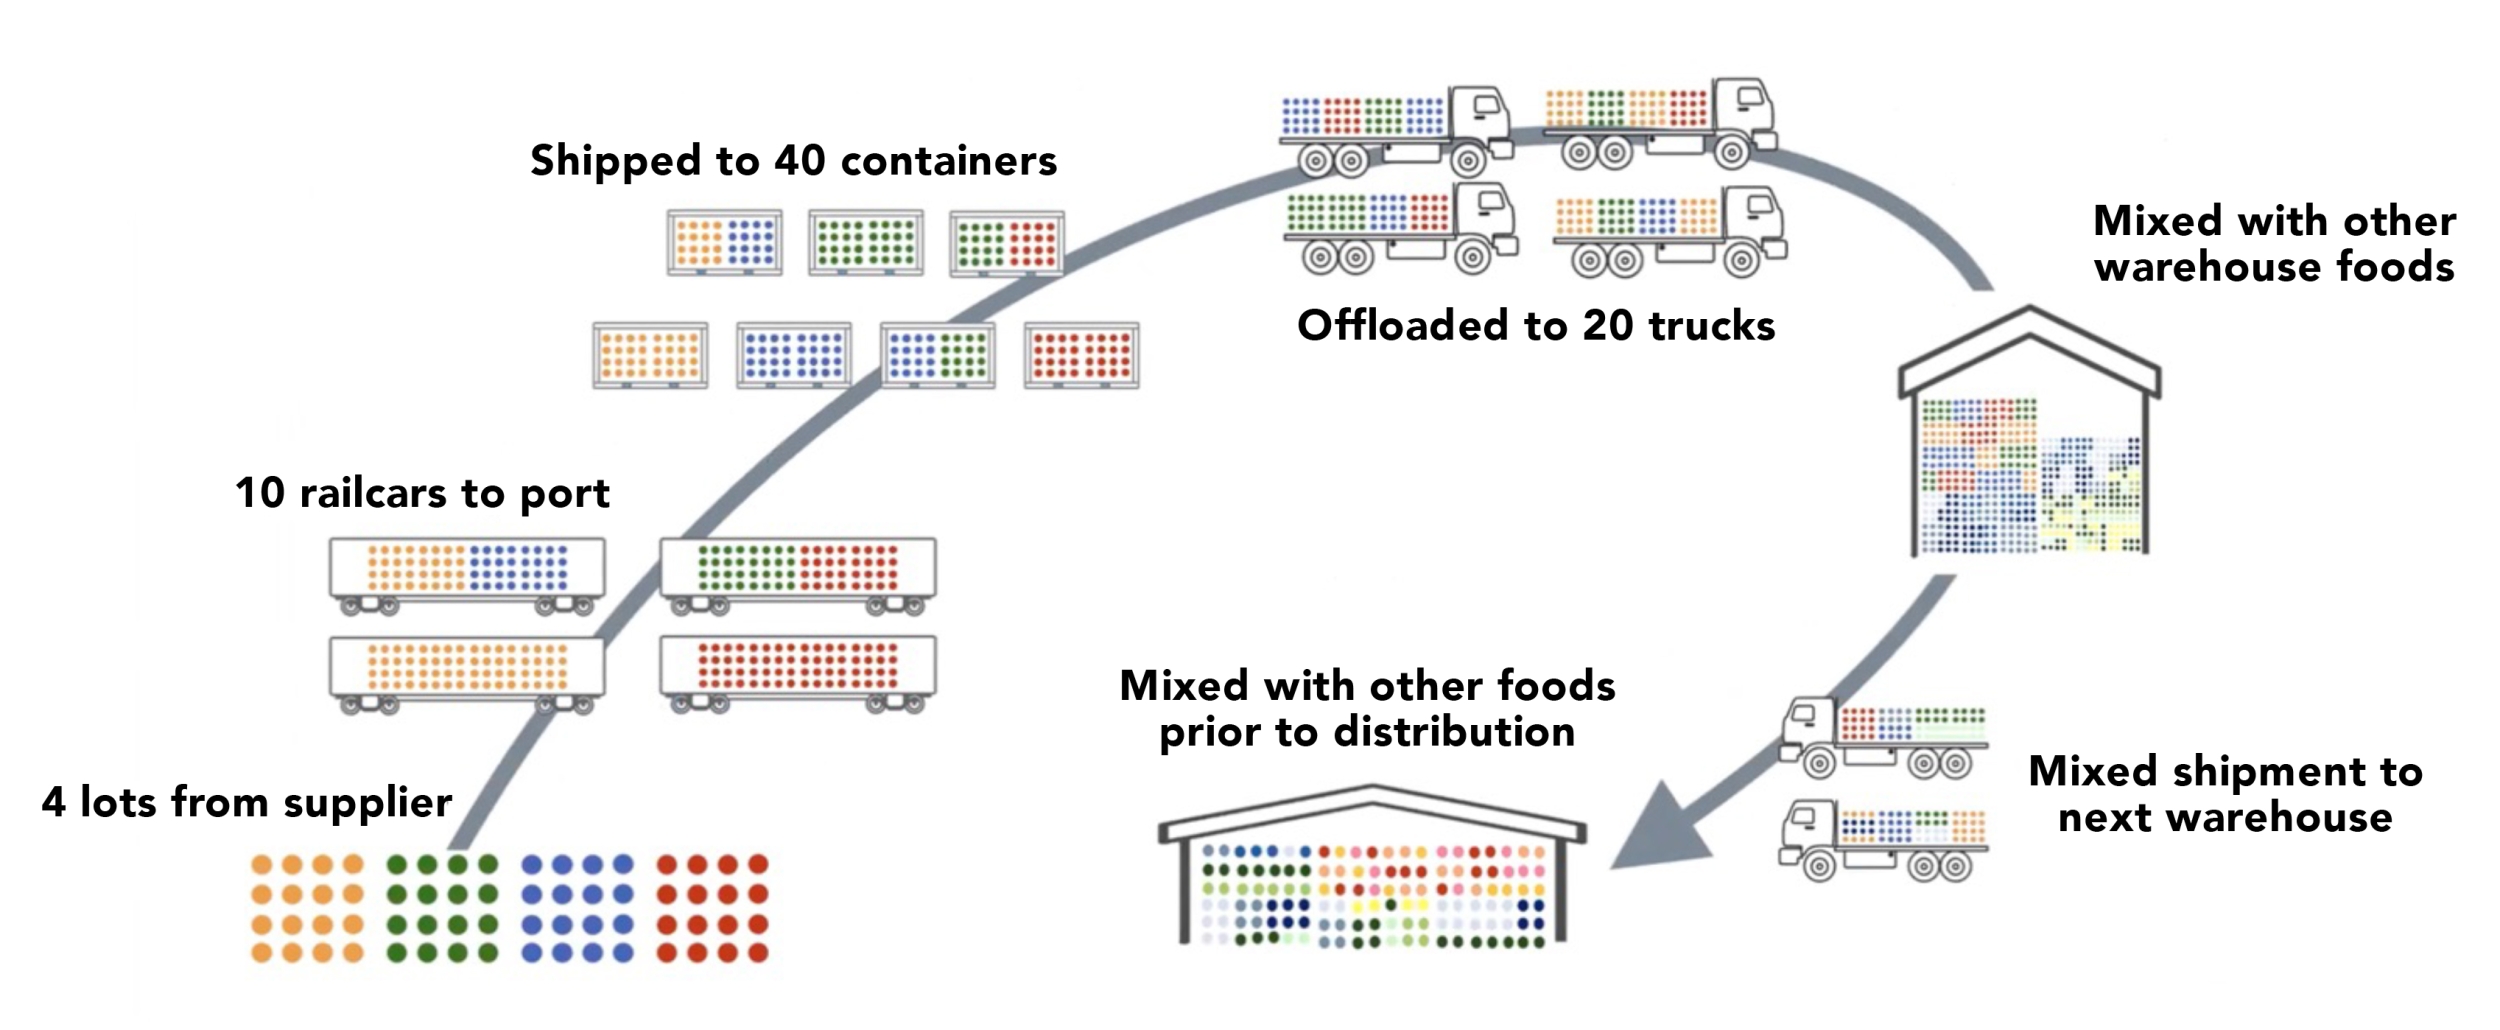 A schematic showing how different lots from a supplier move through the supply chain and get mixed with other foods prior to distribution.